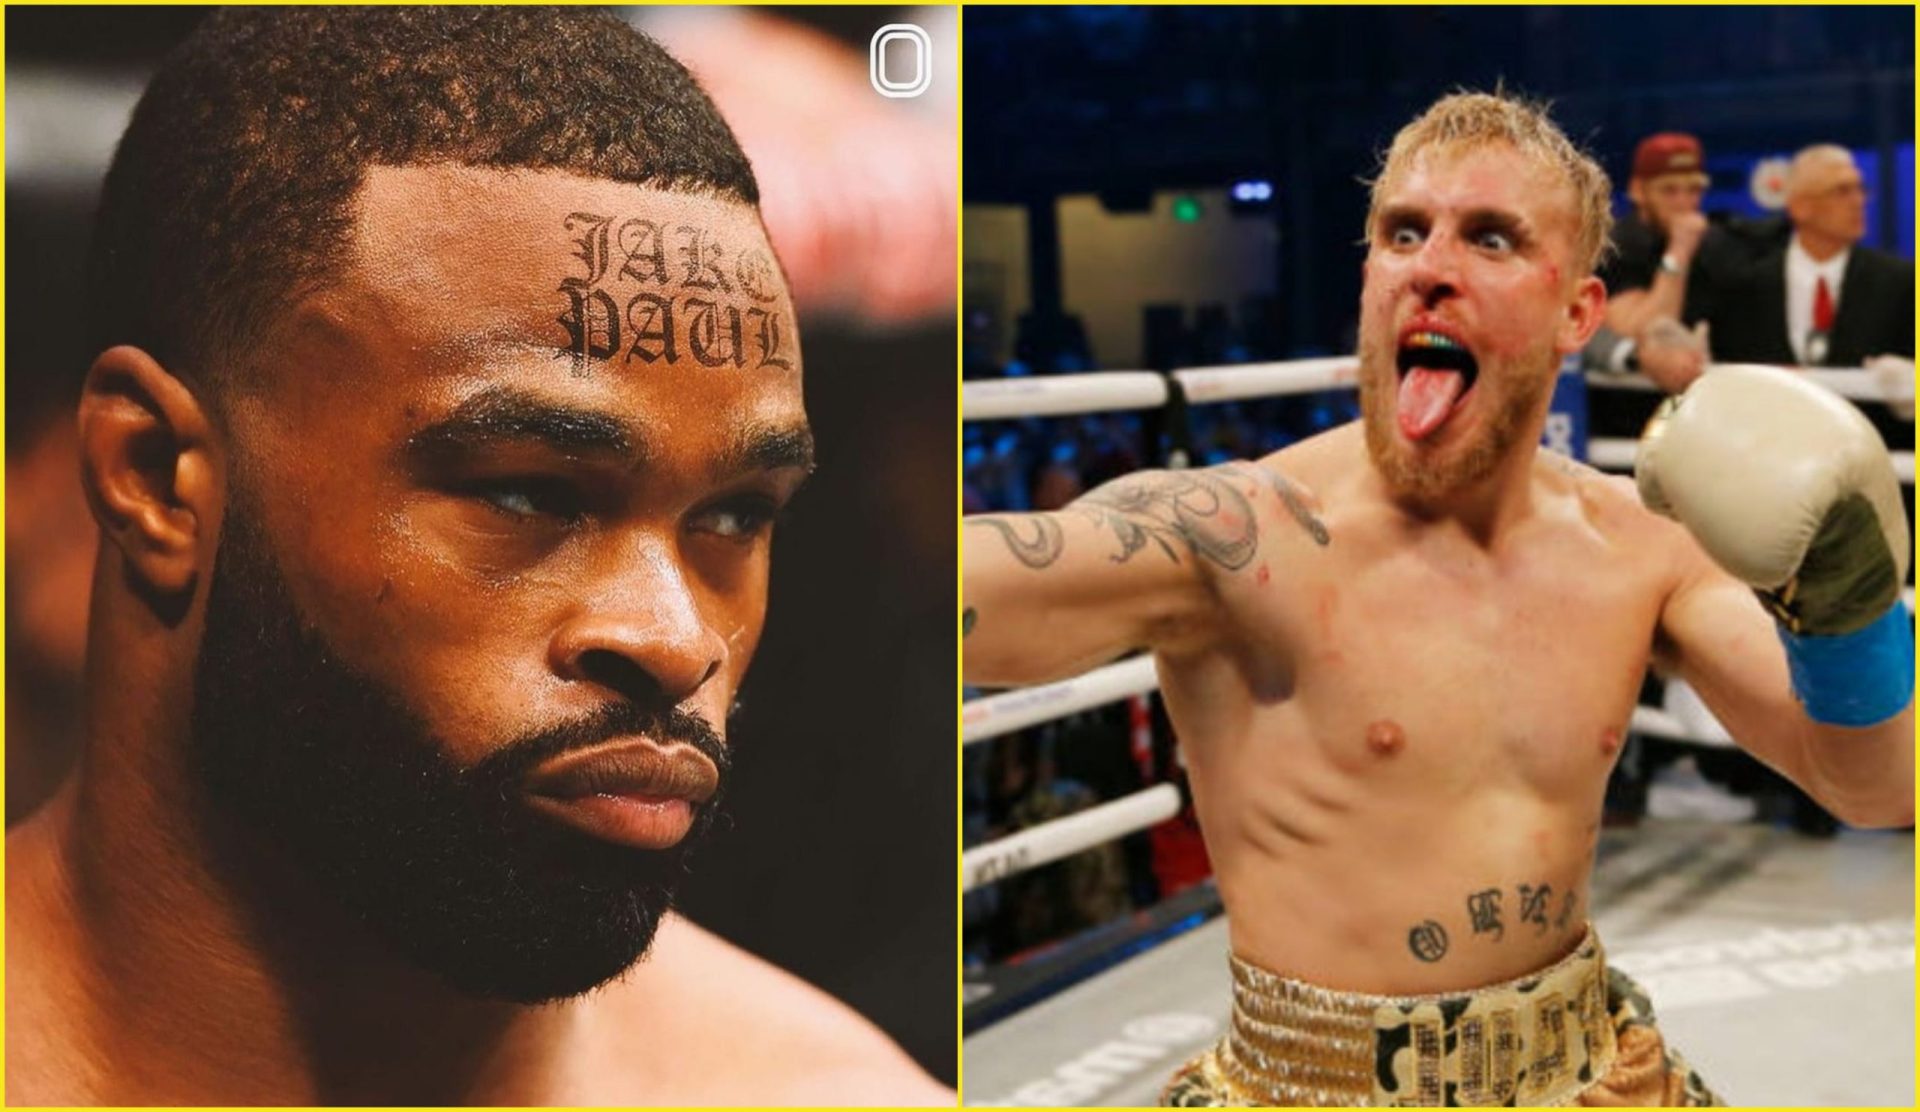 Jake Paul Claims Hes Retired from Boxing After Winning Fight with Tyron  Woodley  Jake Paul Sports  Just Jared Celebrity News and Gossip   Entertainment